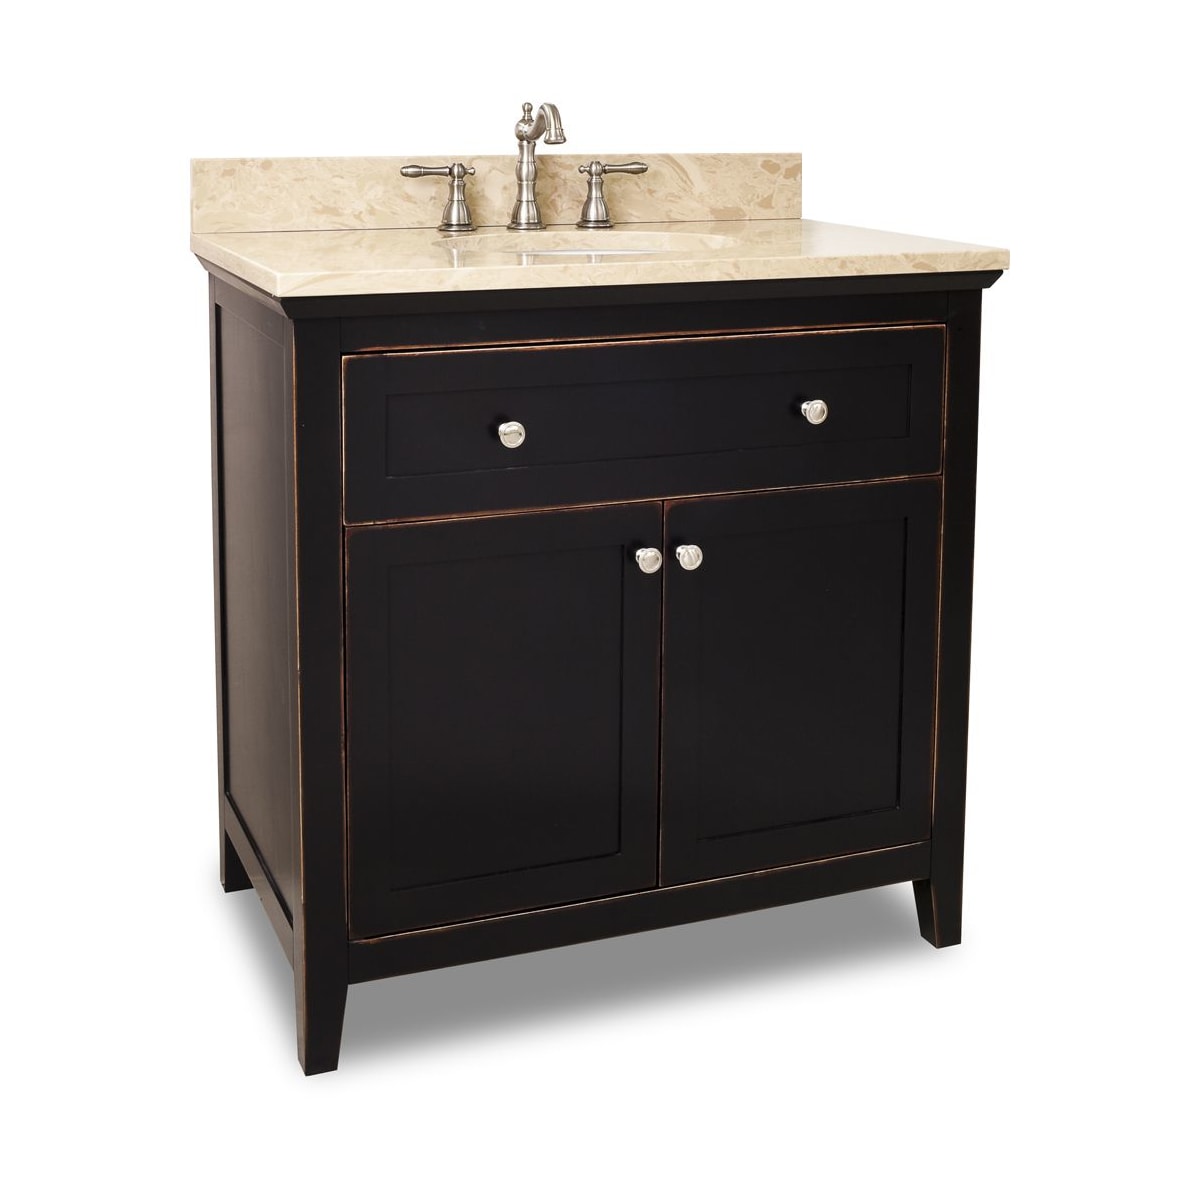 Native Trails 36 Inch Trough Drop In Bathroom Sink With 2 Faucet